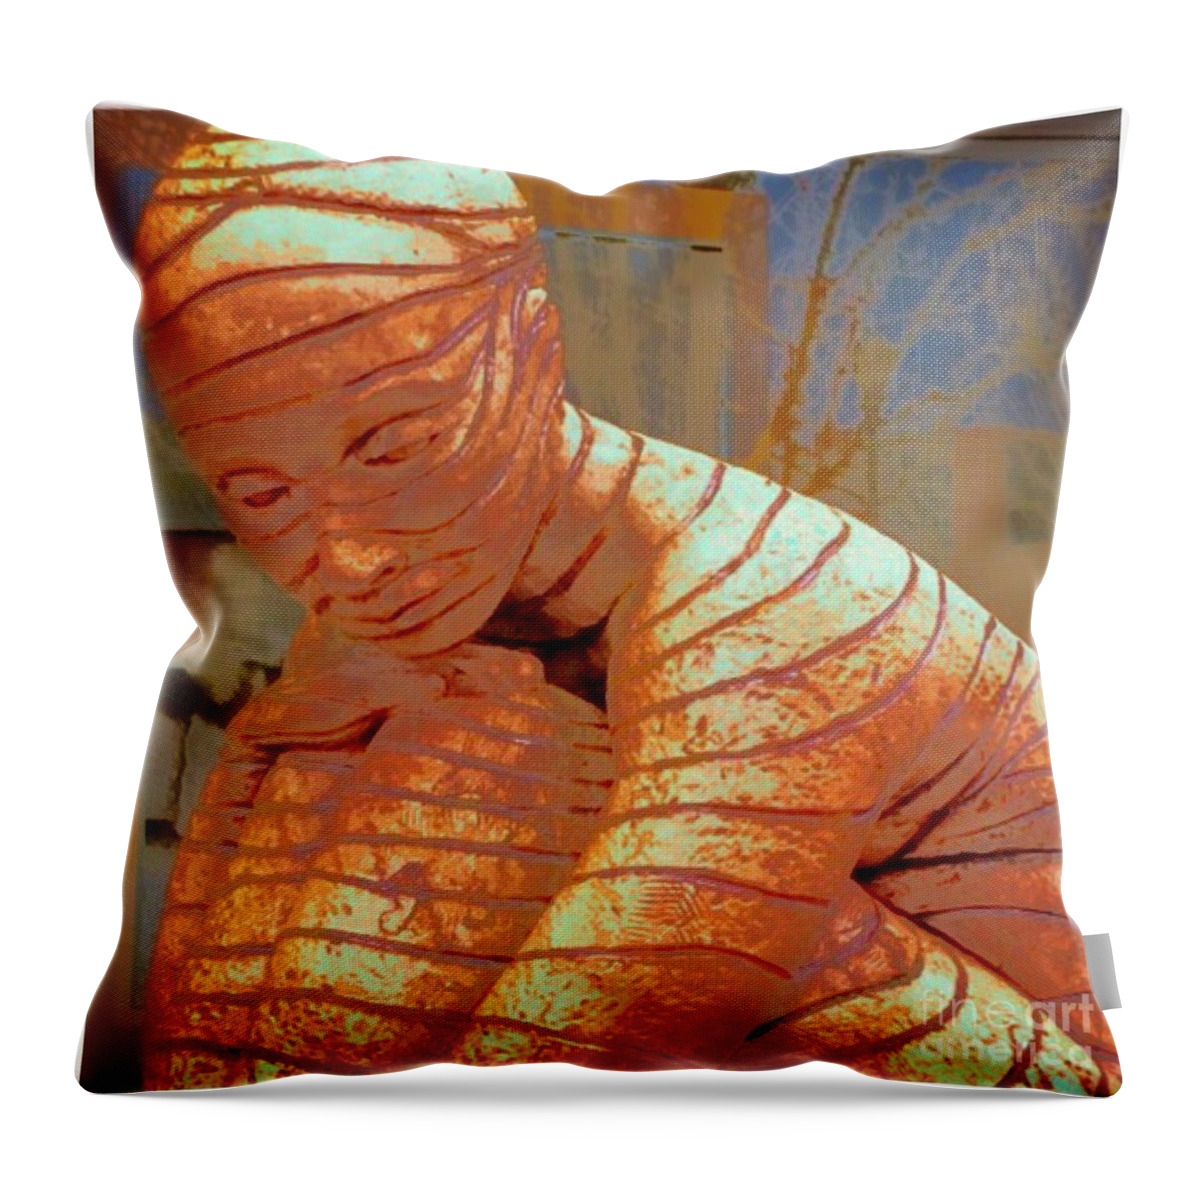 My Lady Throw Pillow featuring the photograph My Lady by Susan Garren